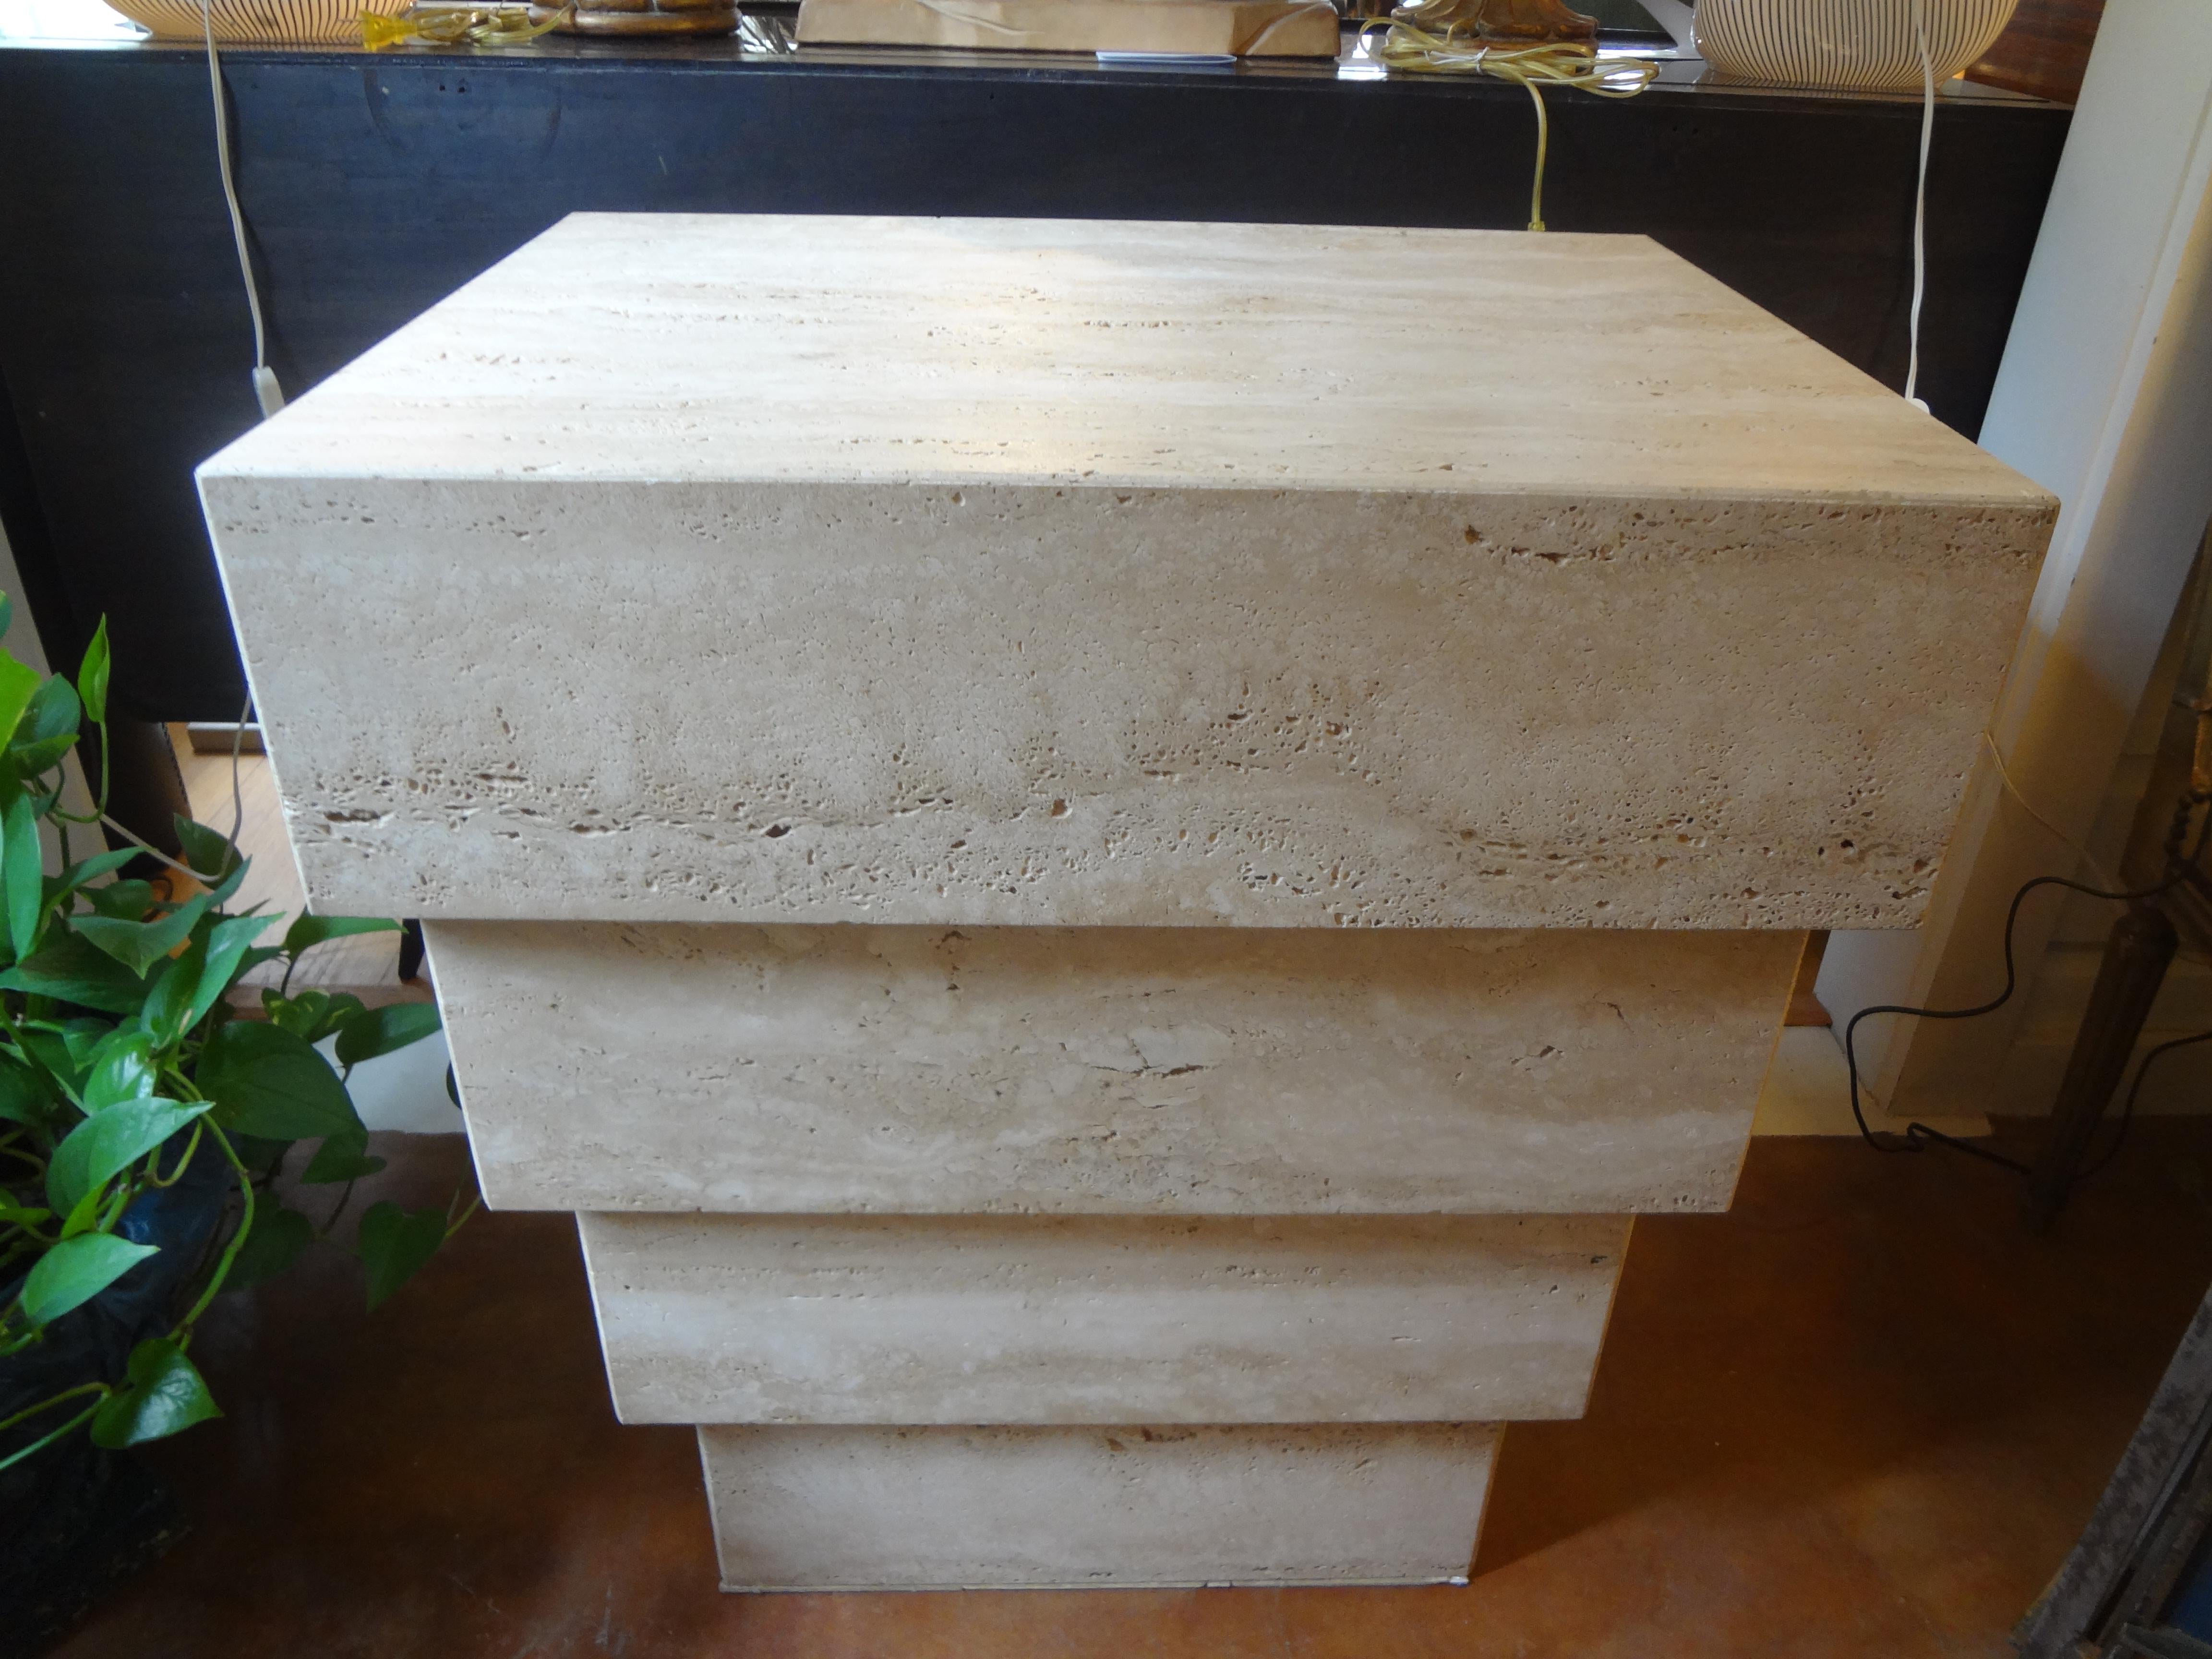 Beautiful Italian Angelo Mangiarotti style travertine pedestal, console or dining table base consisting of an inverted stack of honed travertine 